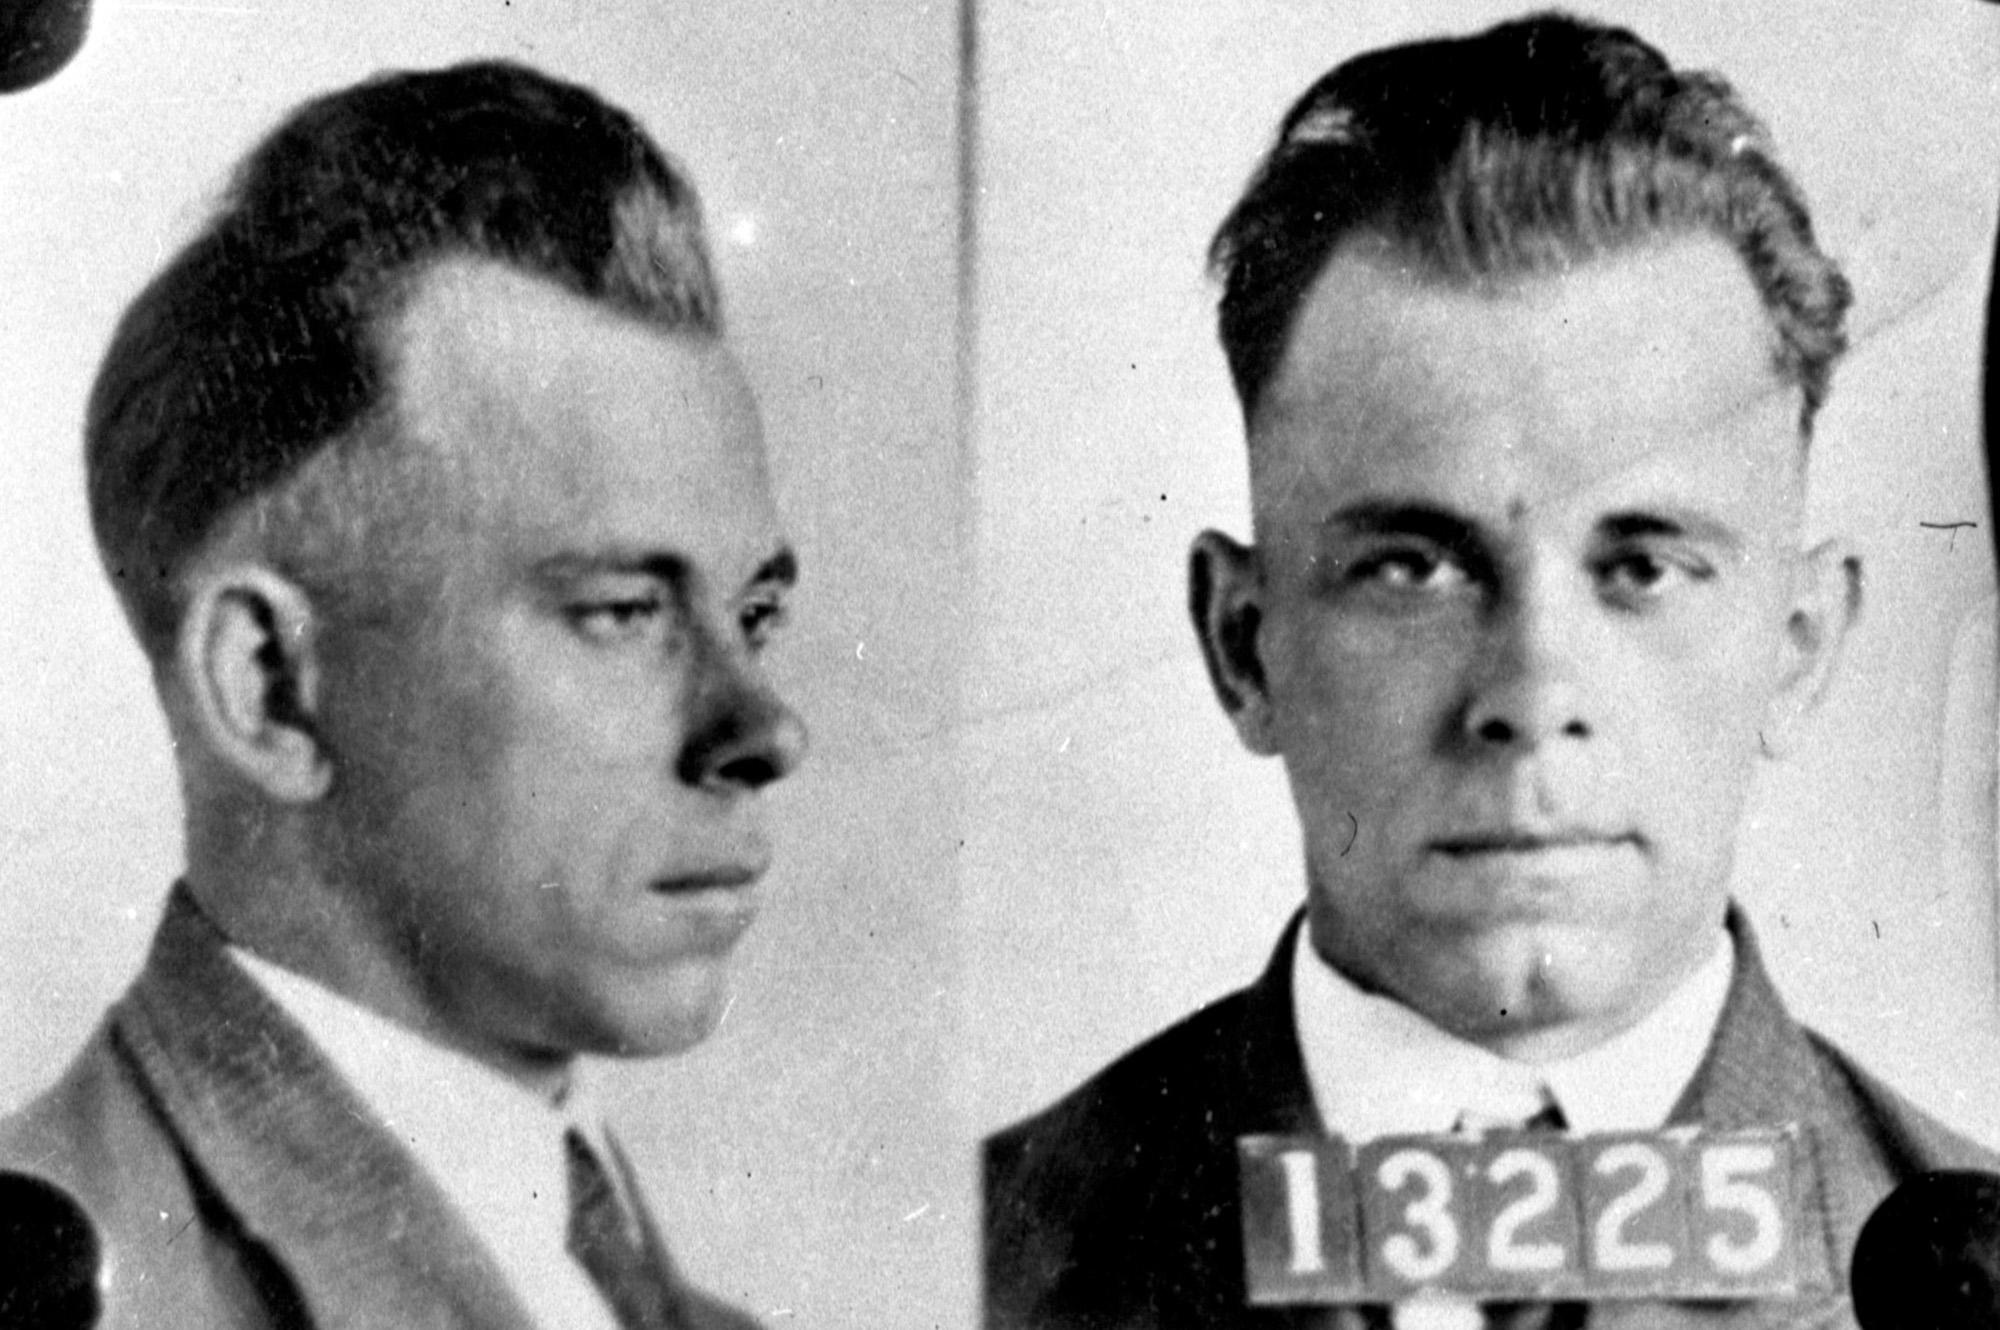 John Dillinger's body will be exhumed and reburied on New Year's Eve